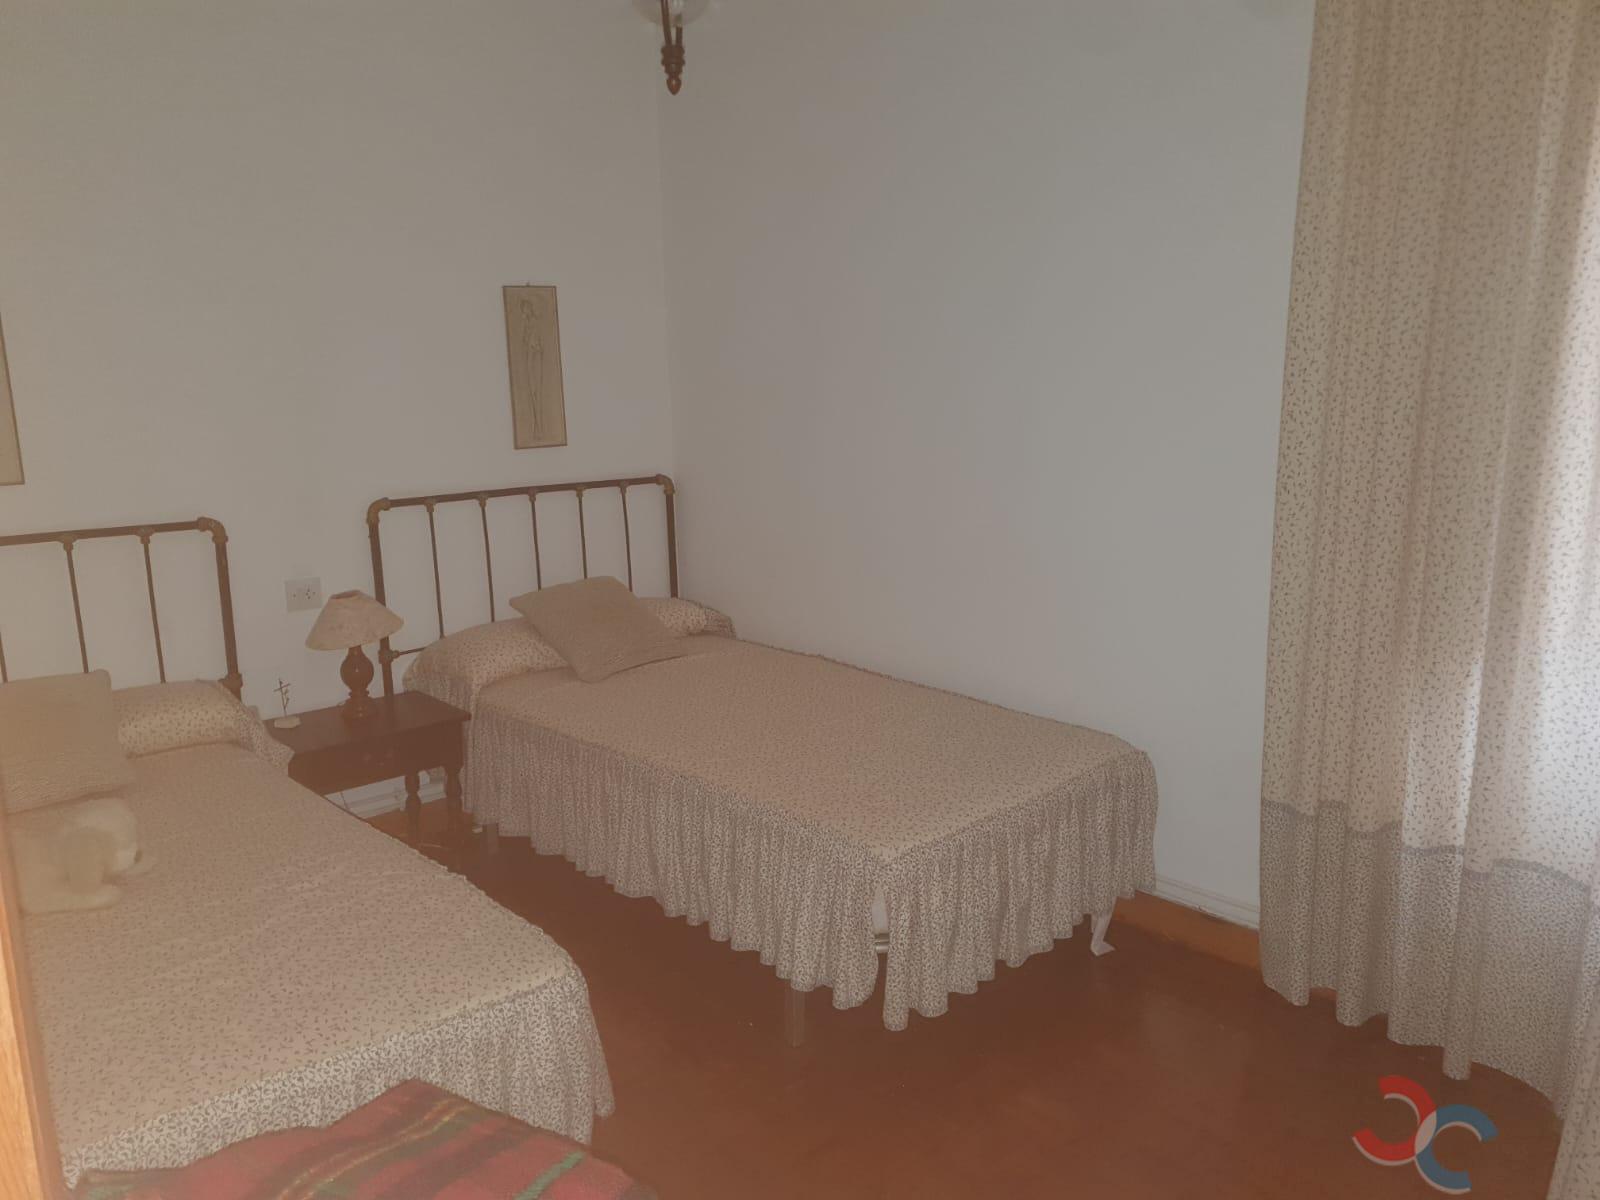 For sale of house in Moraña